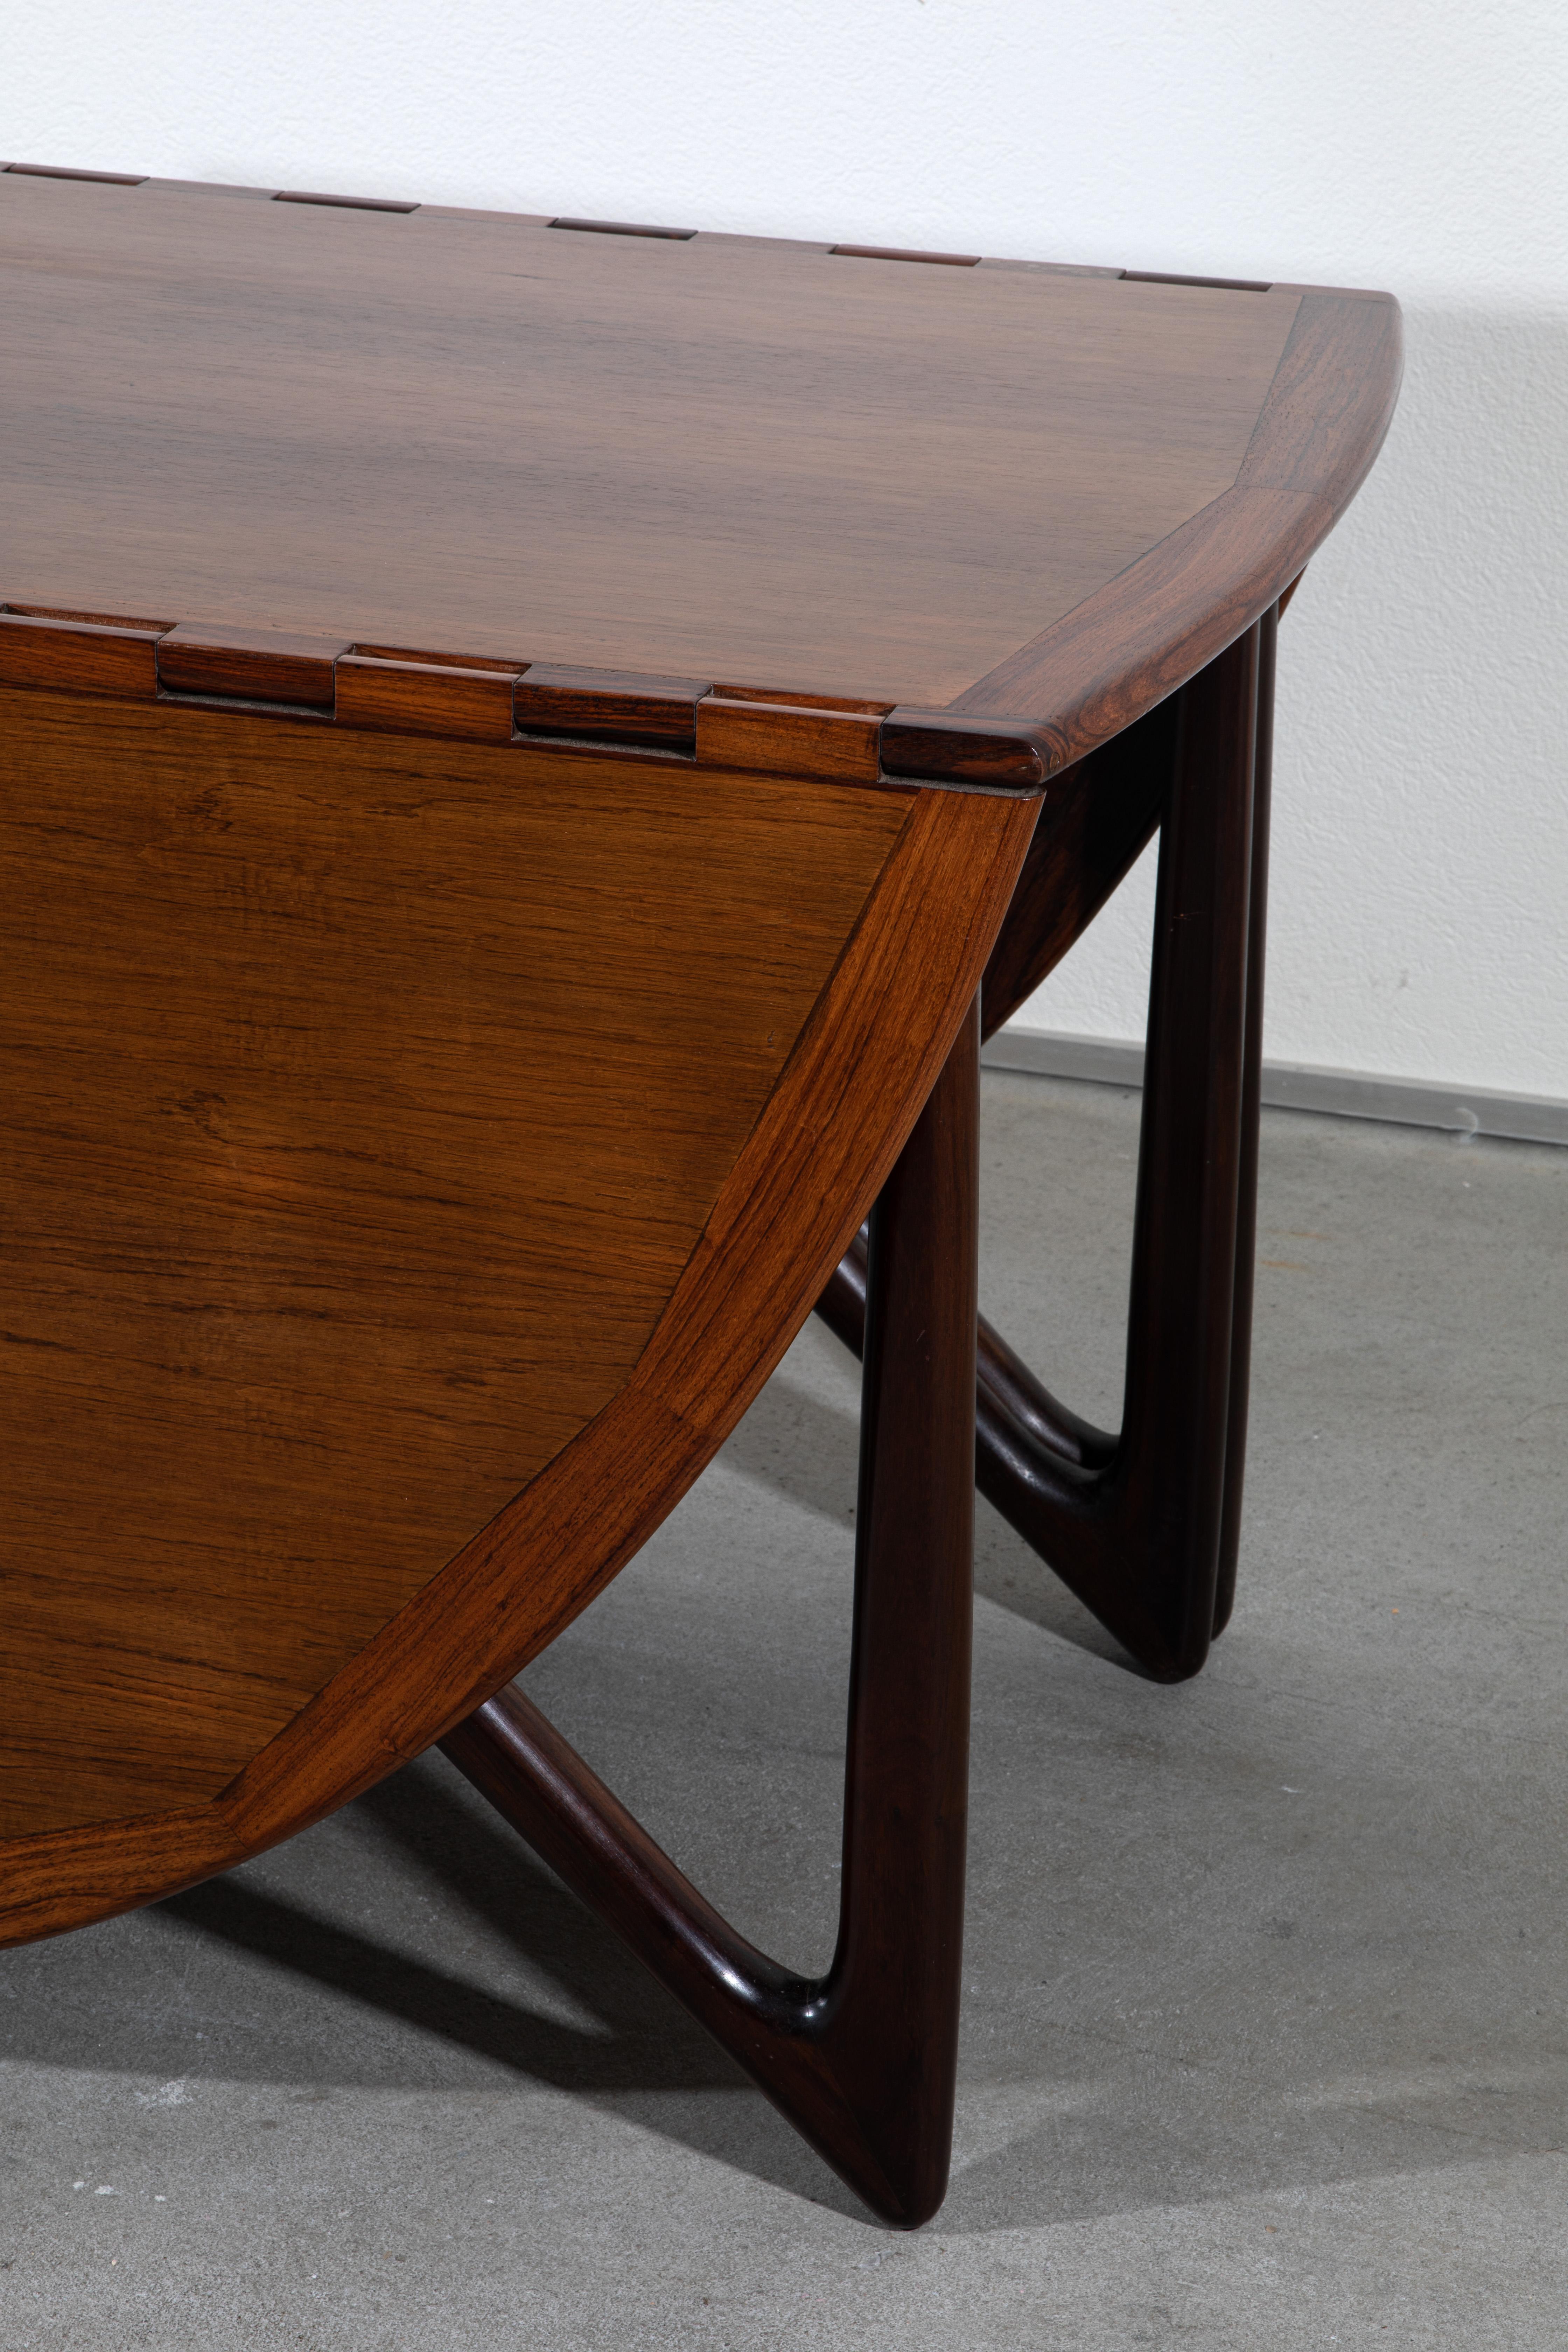 Niels Koefoed was a Danish furniture designer known for his contributions to mid-20th-century Danish modern design. The Oval-Klap dining table is likely one of his notable designs.